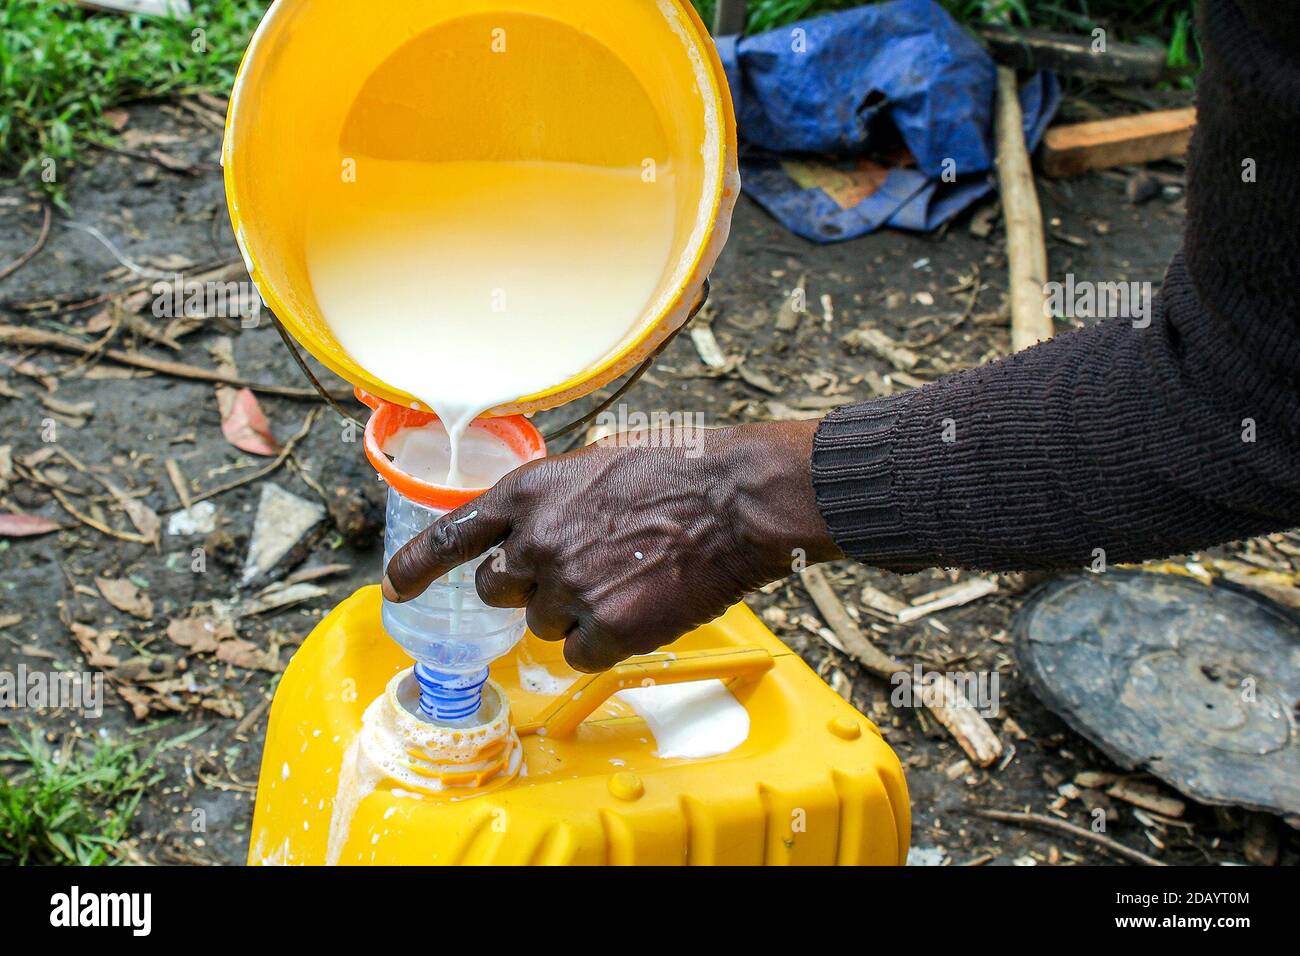 Vedaste Muhire, a manager at Theophile Kamanzi’s farm, pours recently extracted milk into a can to cover and protect it from becoming contaminated. Stock Photo